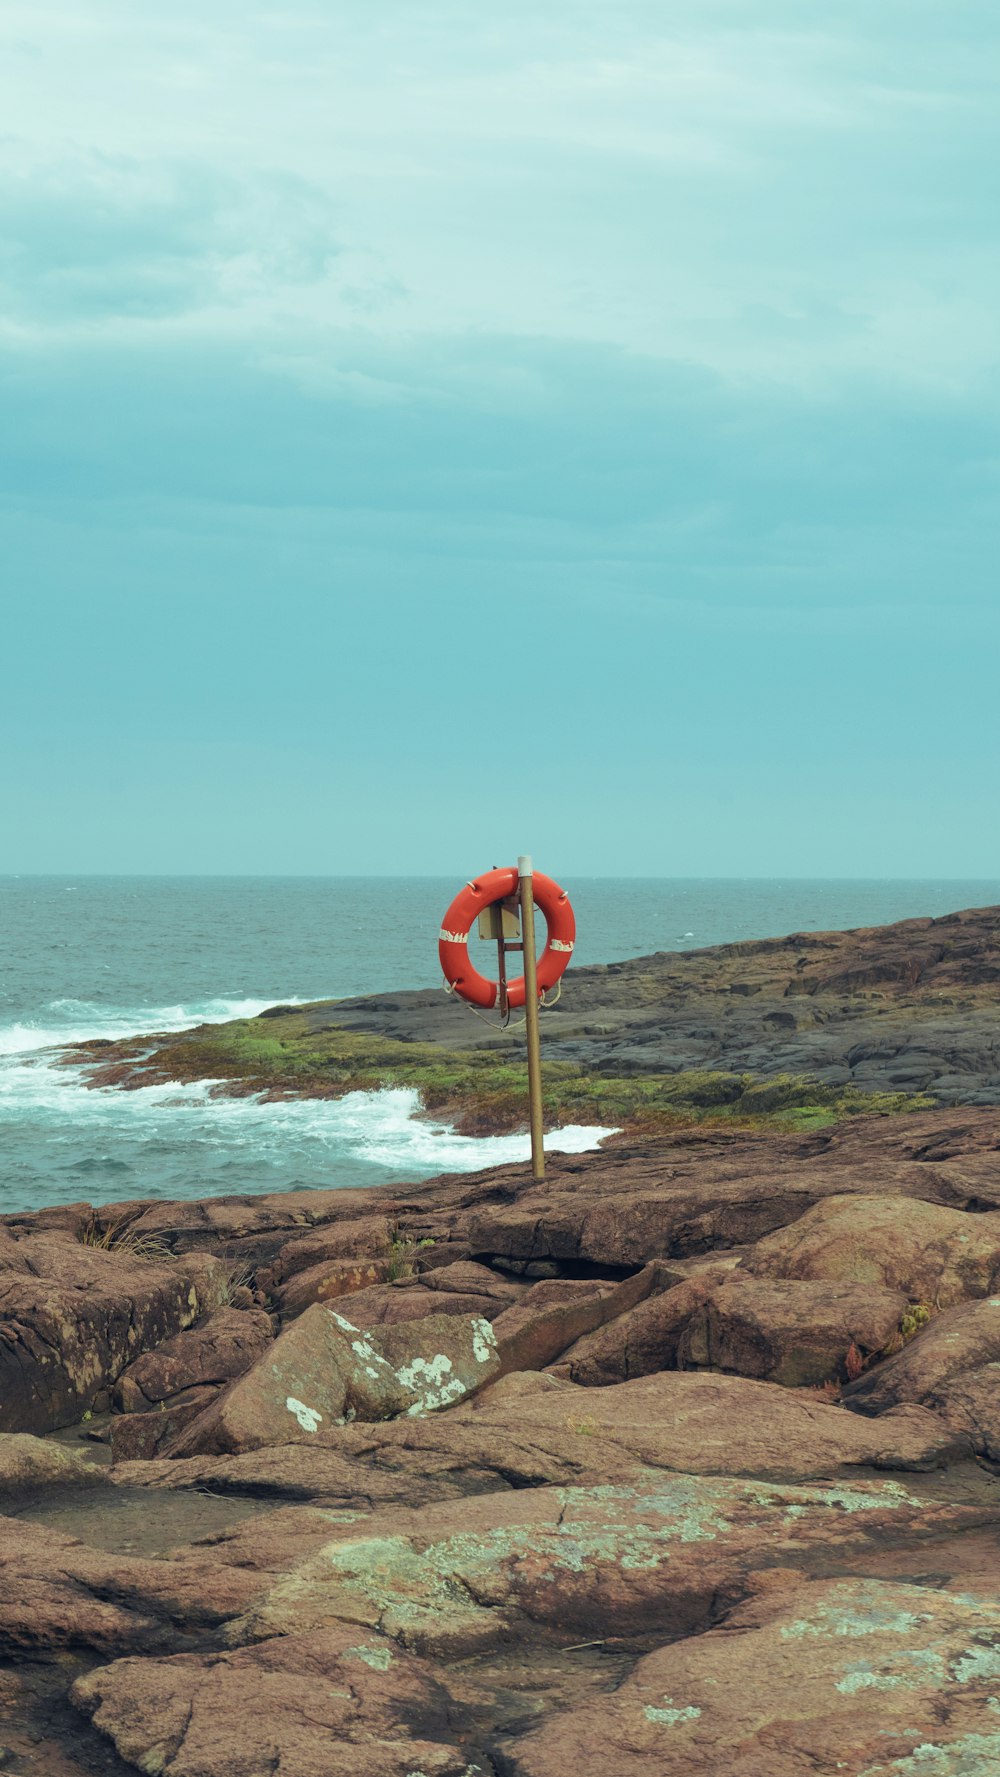 a life preserver on a rocky shore by the ocean